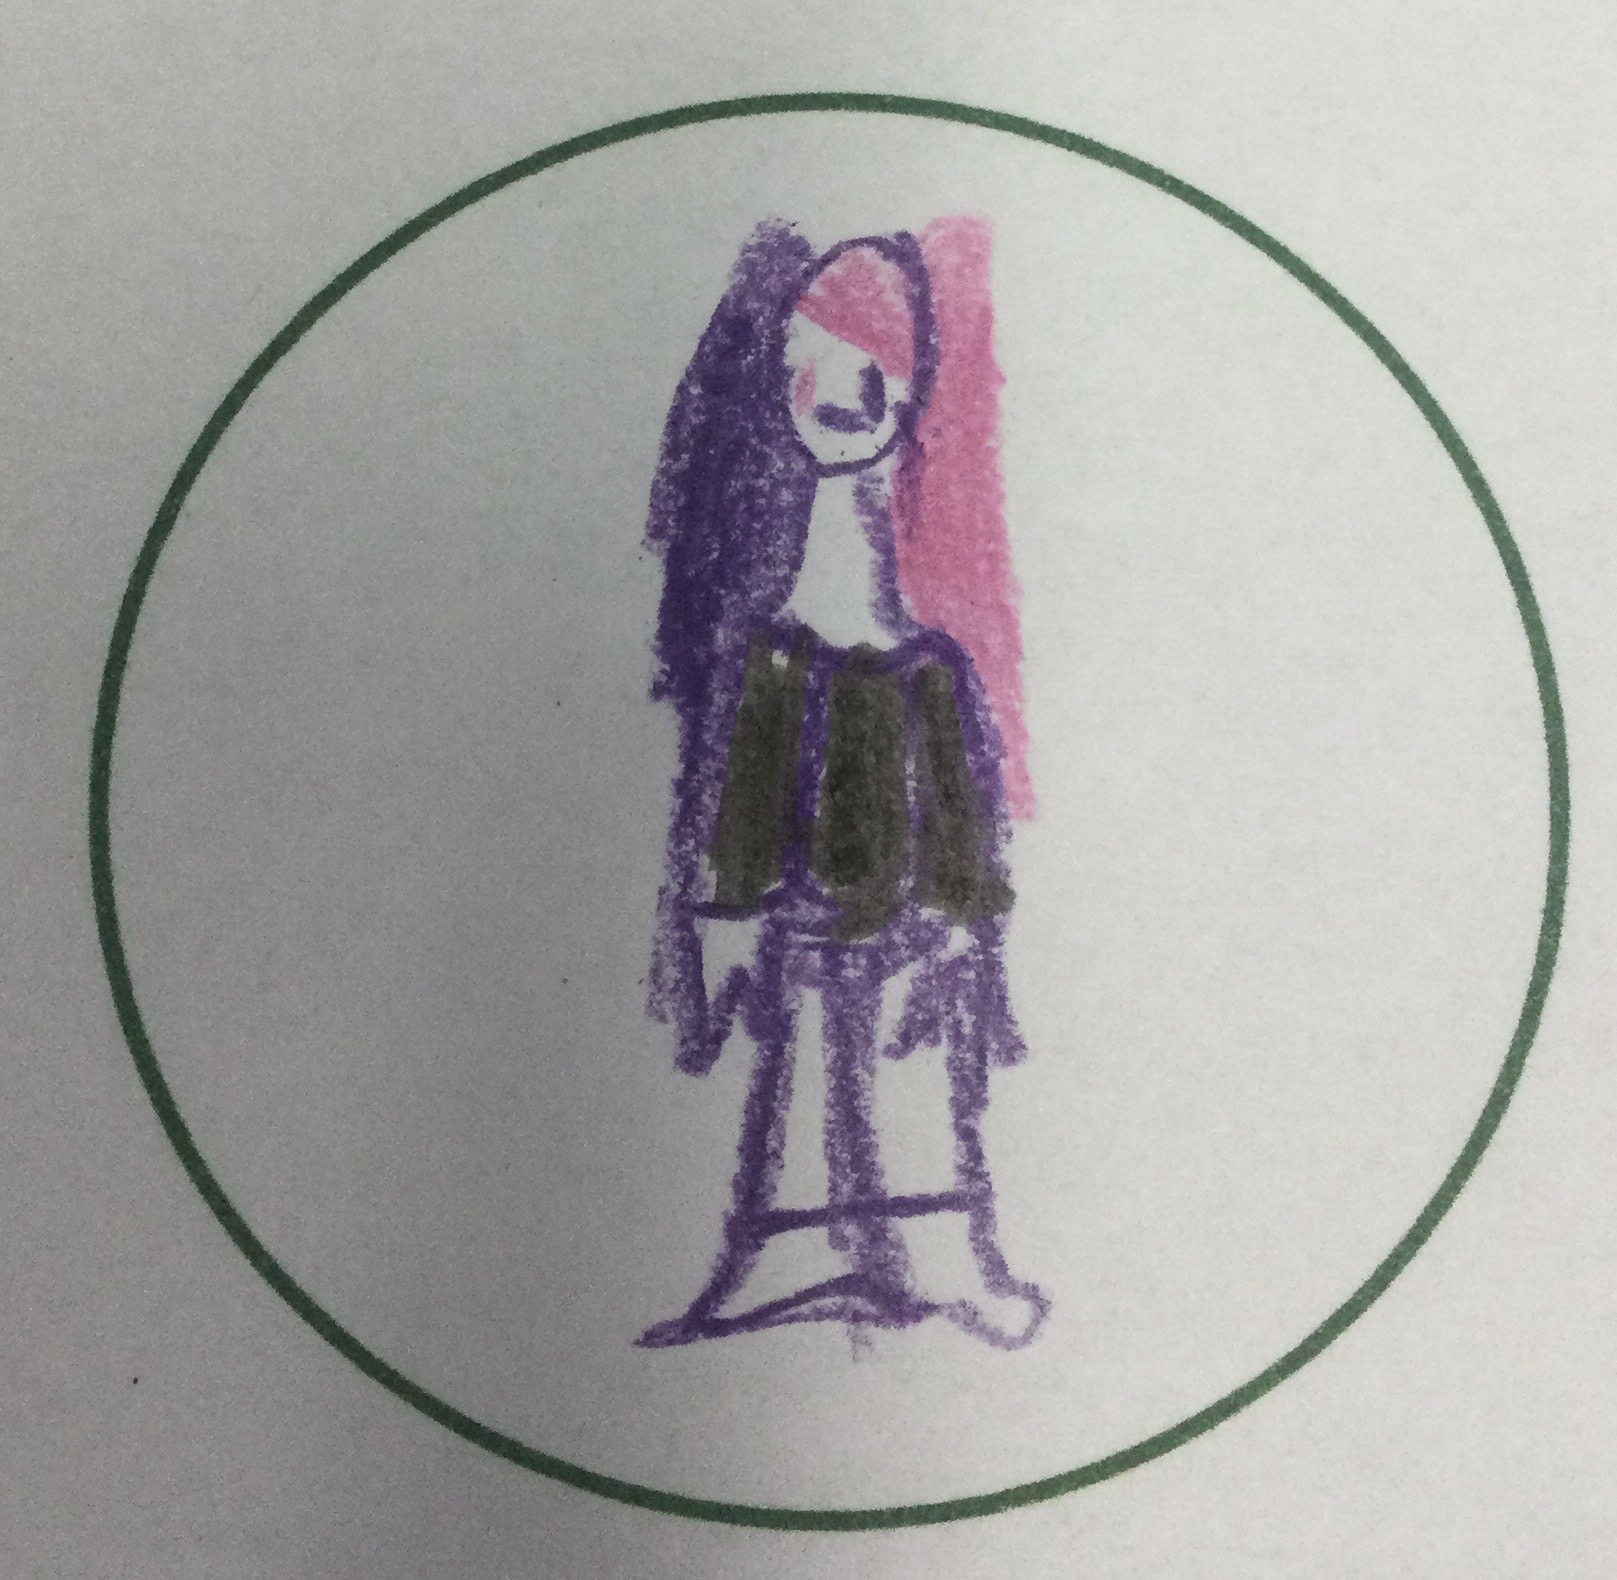 A figure with pink and purple hair